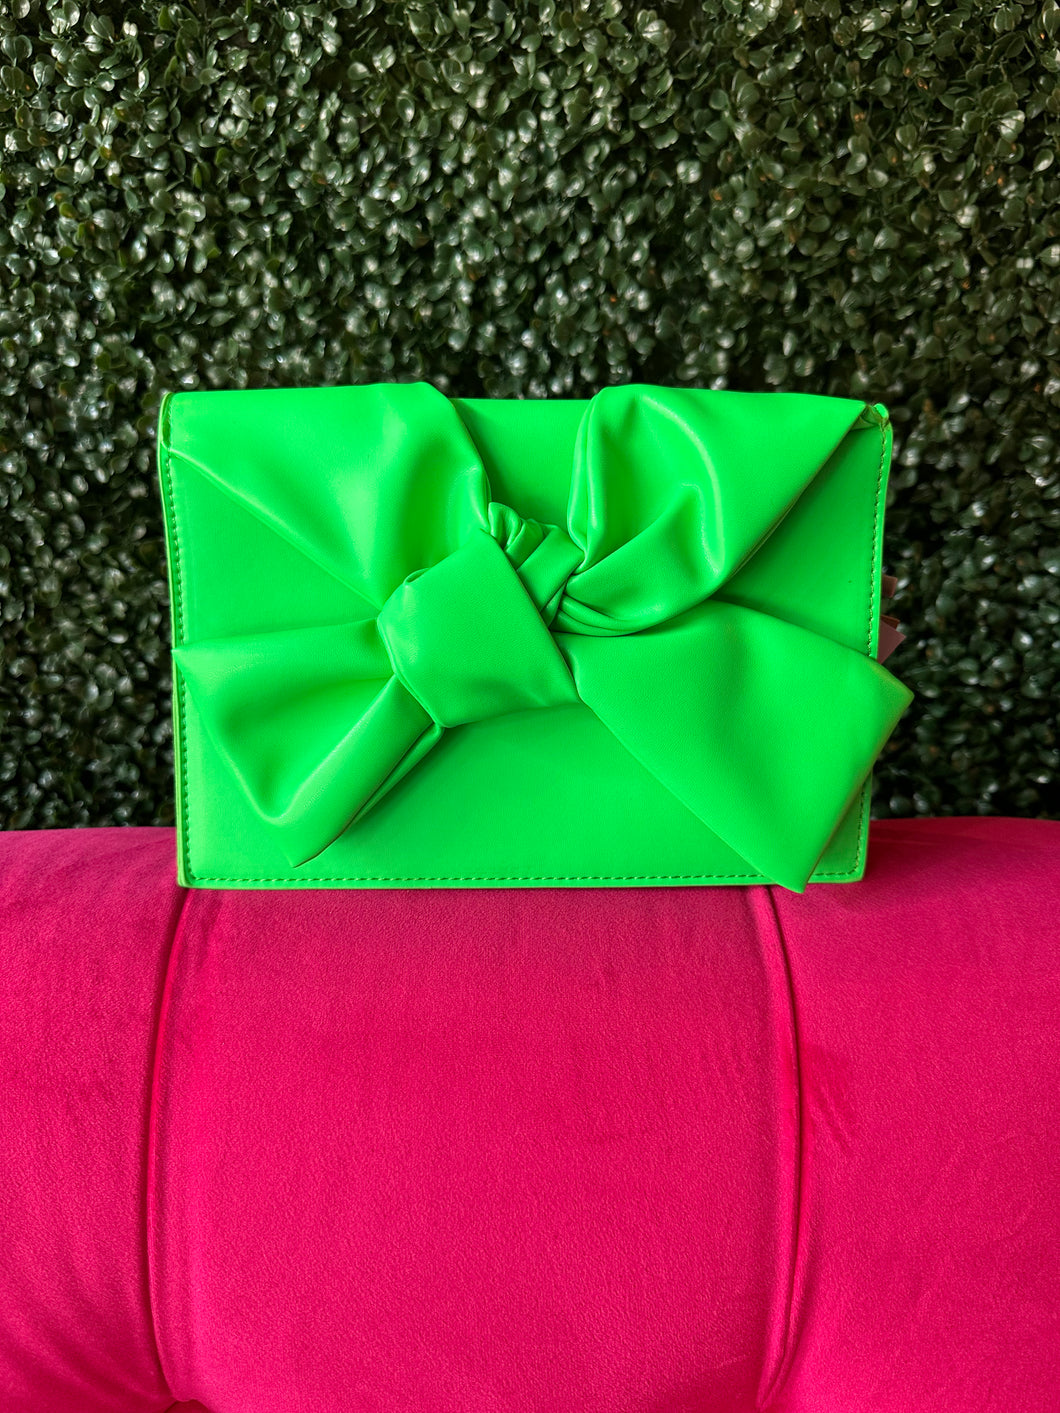 Neon Green Bow Front clutch